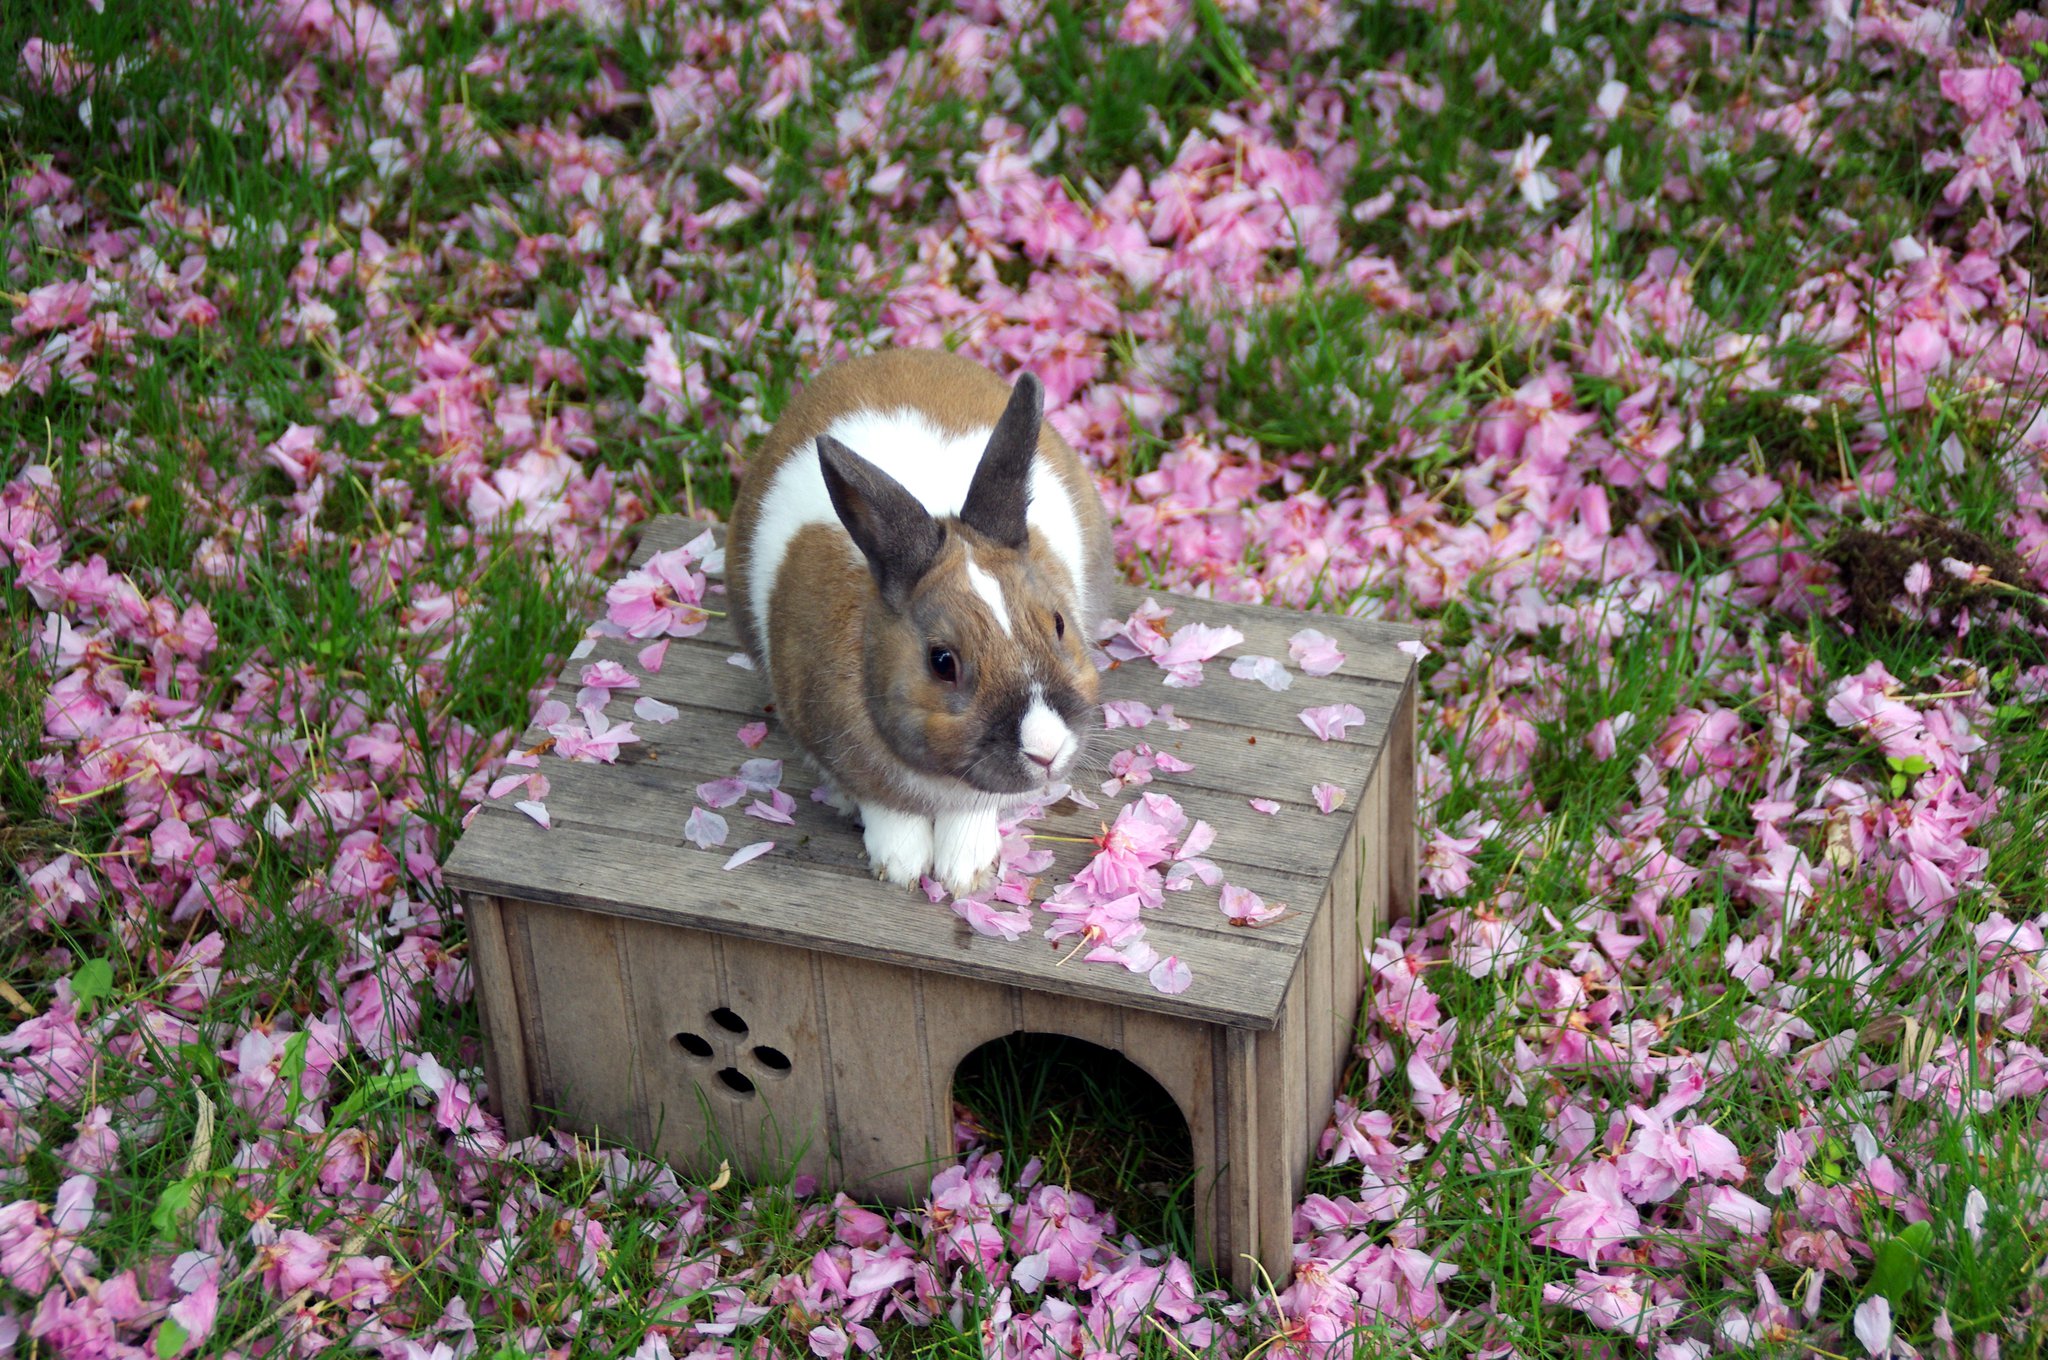 Bunny Stands on His House to Get a Better Look Around the Garden